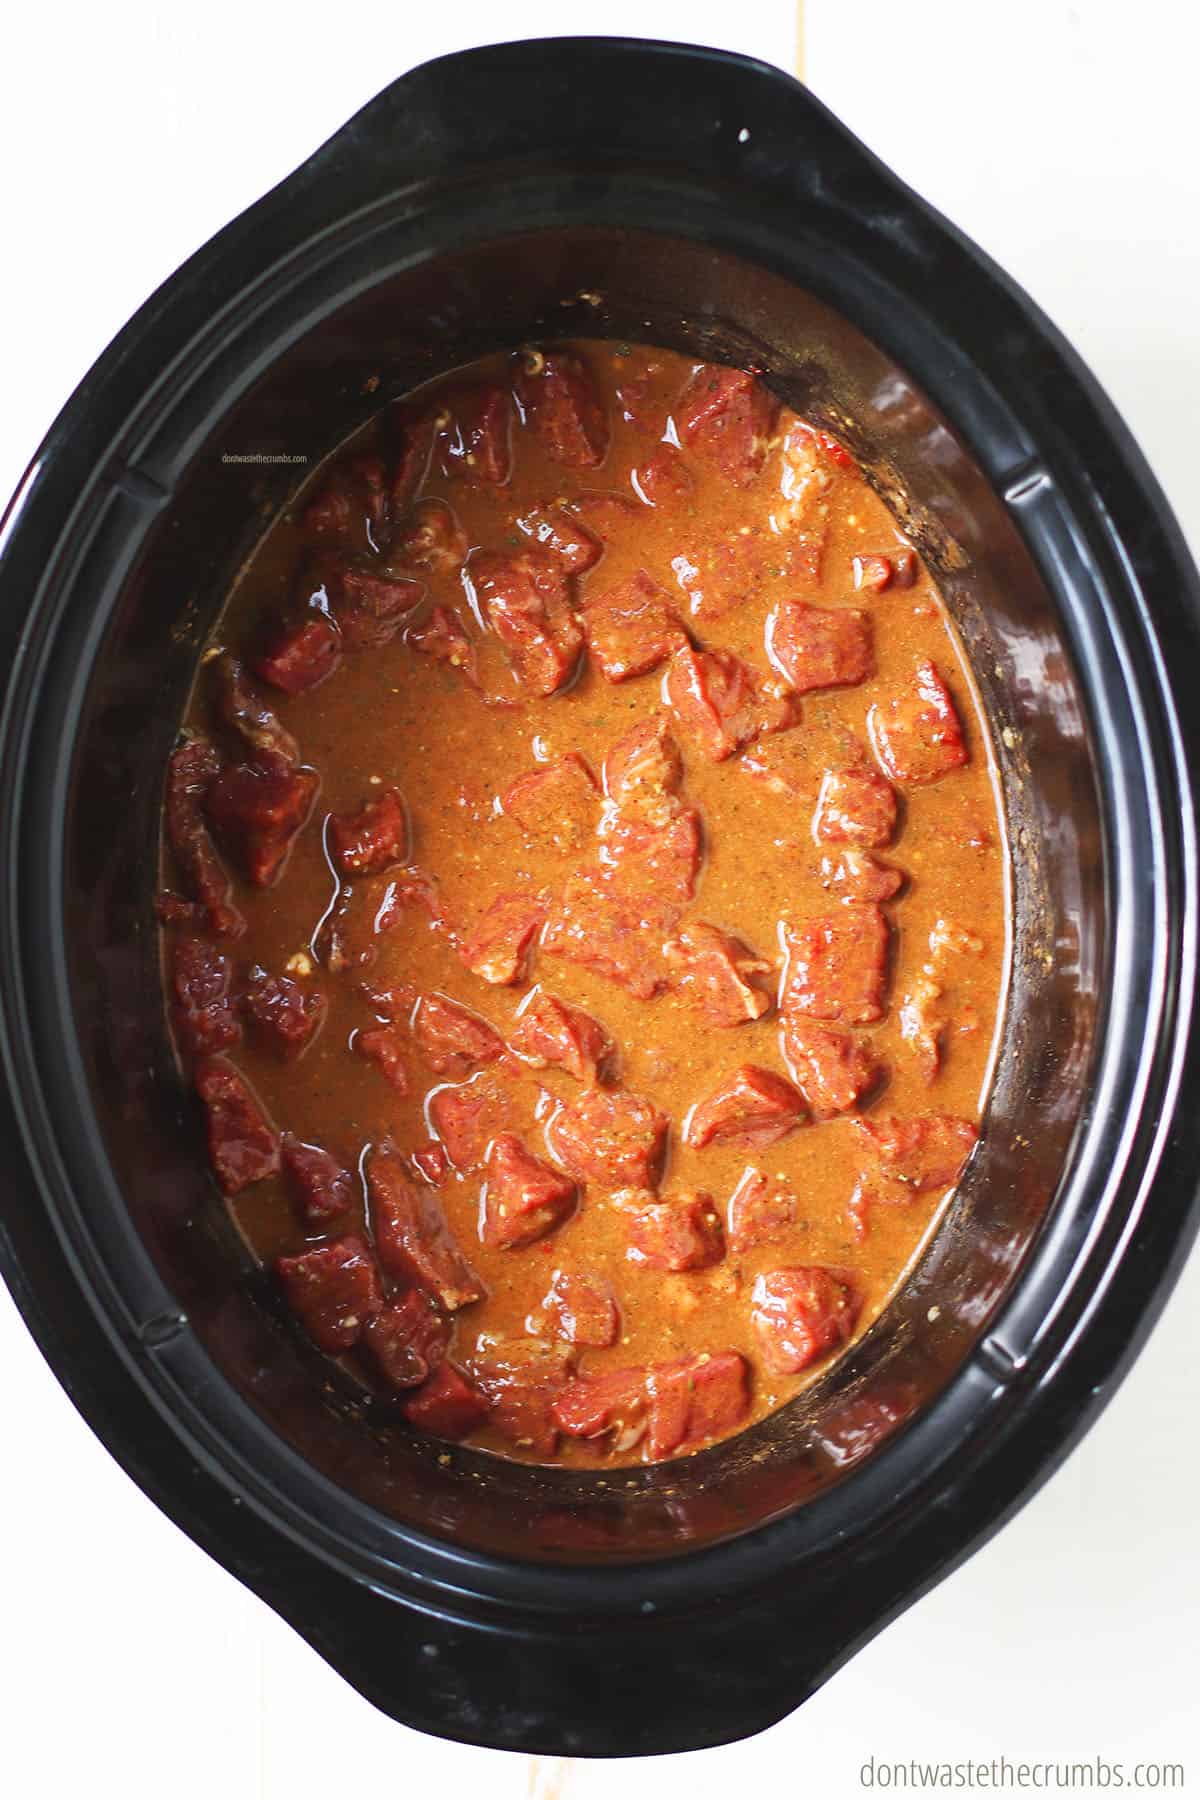 Chunks of meat, beef stock, and tomato paste are all mixed together in the crock pot.